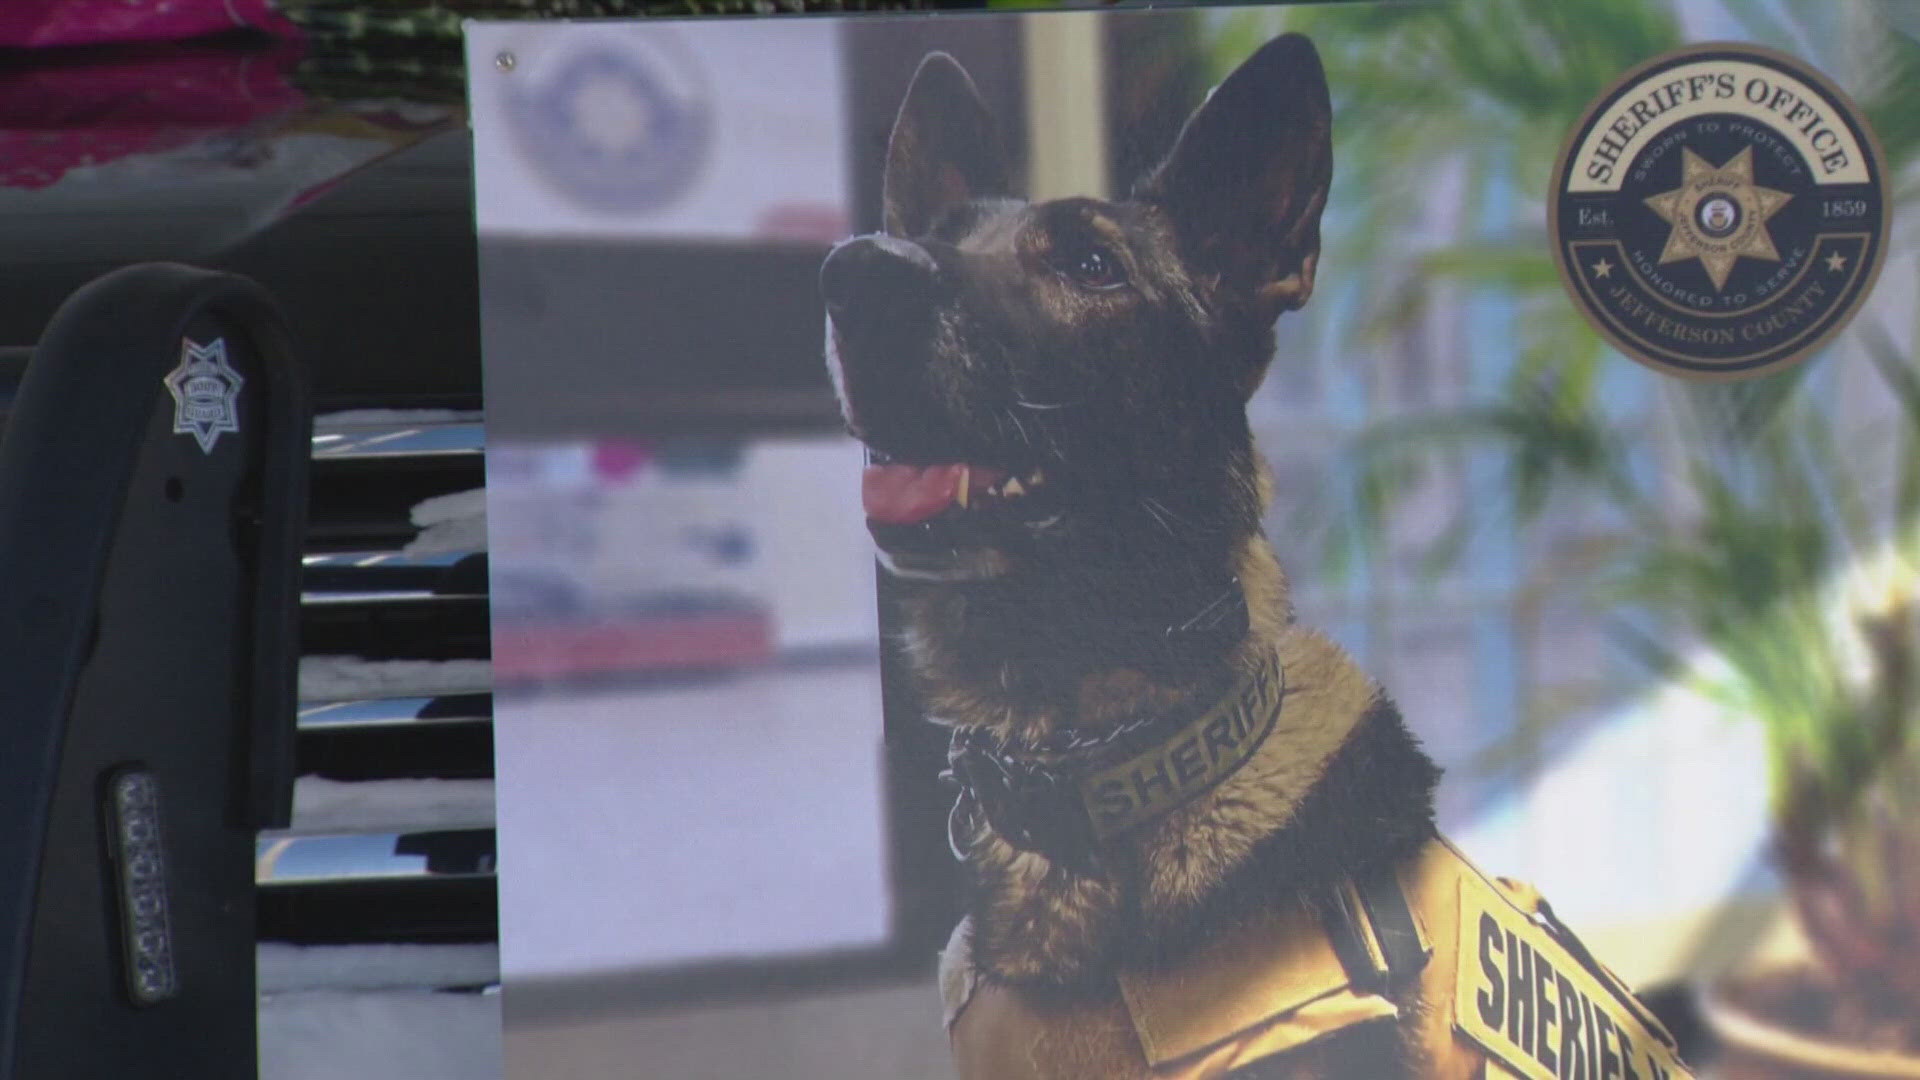 The National Police Dog Foundation is honoring K9 Graffit, who served with the Jefferson County Sheriff's Office for years before he was killed in the line of duty.